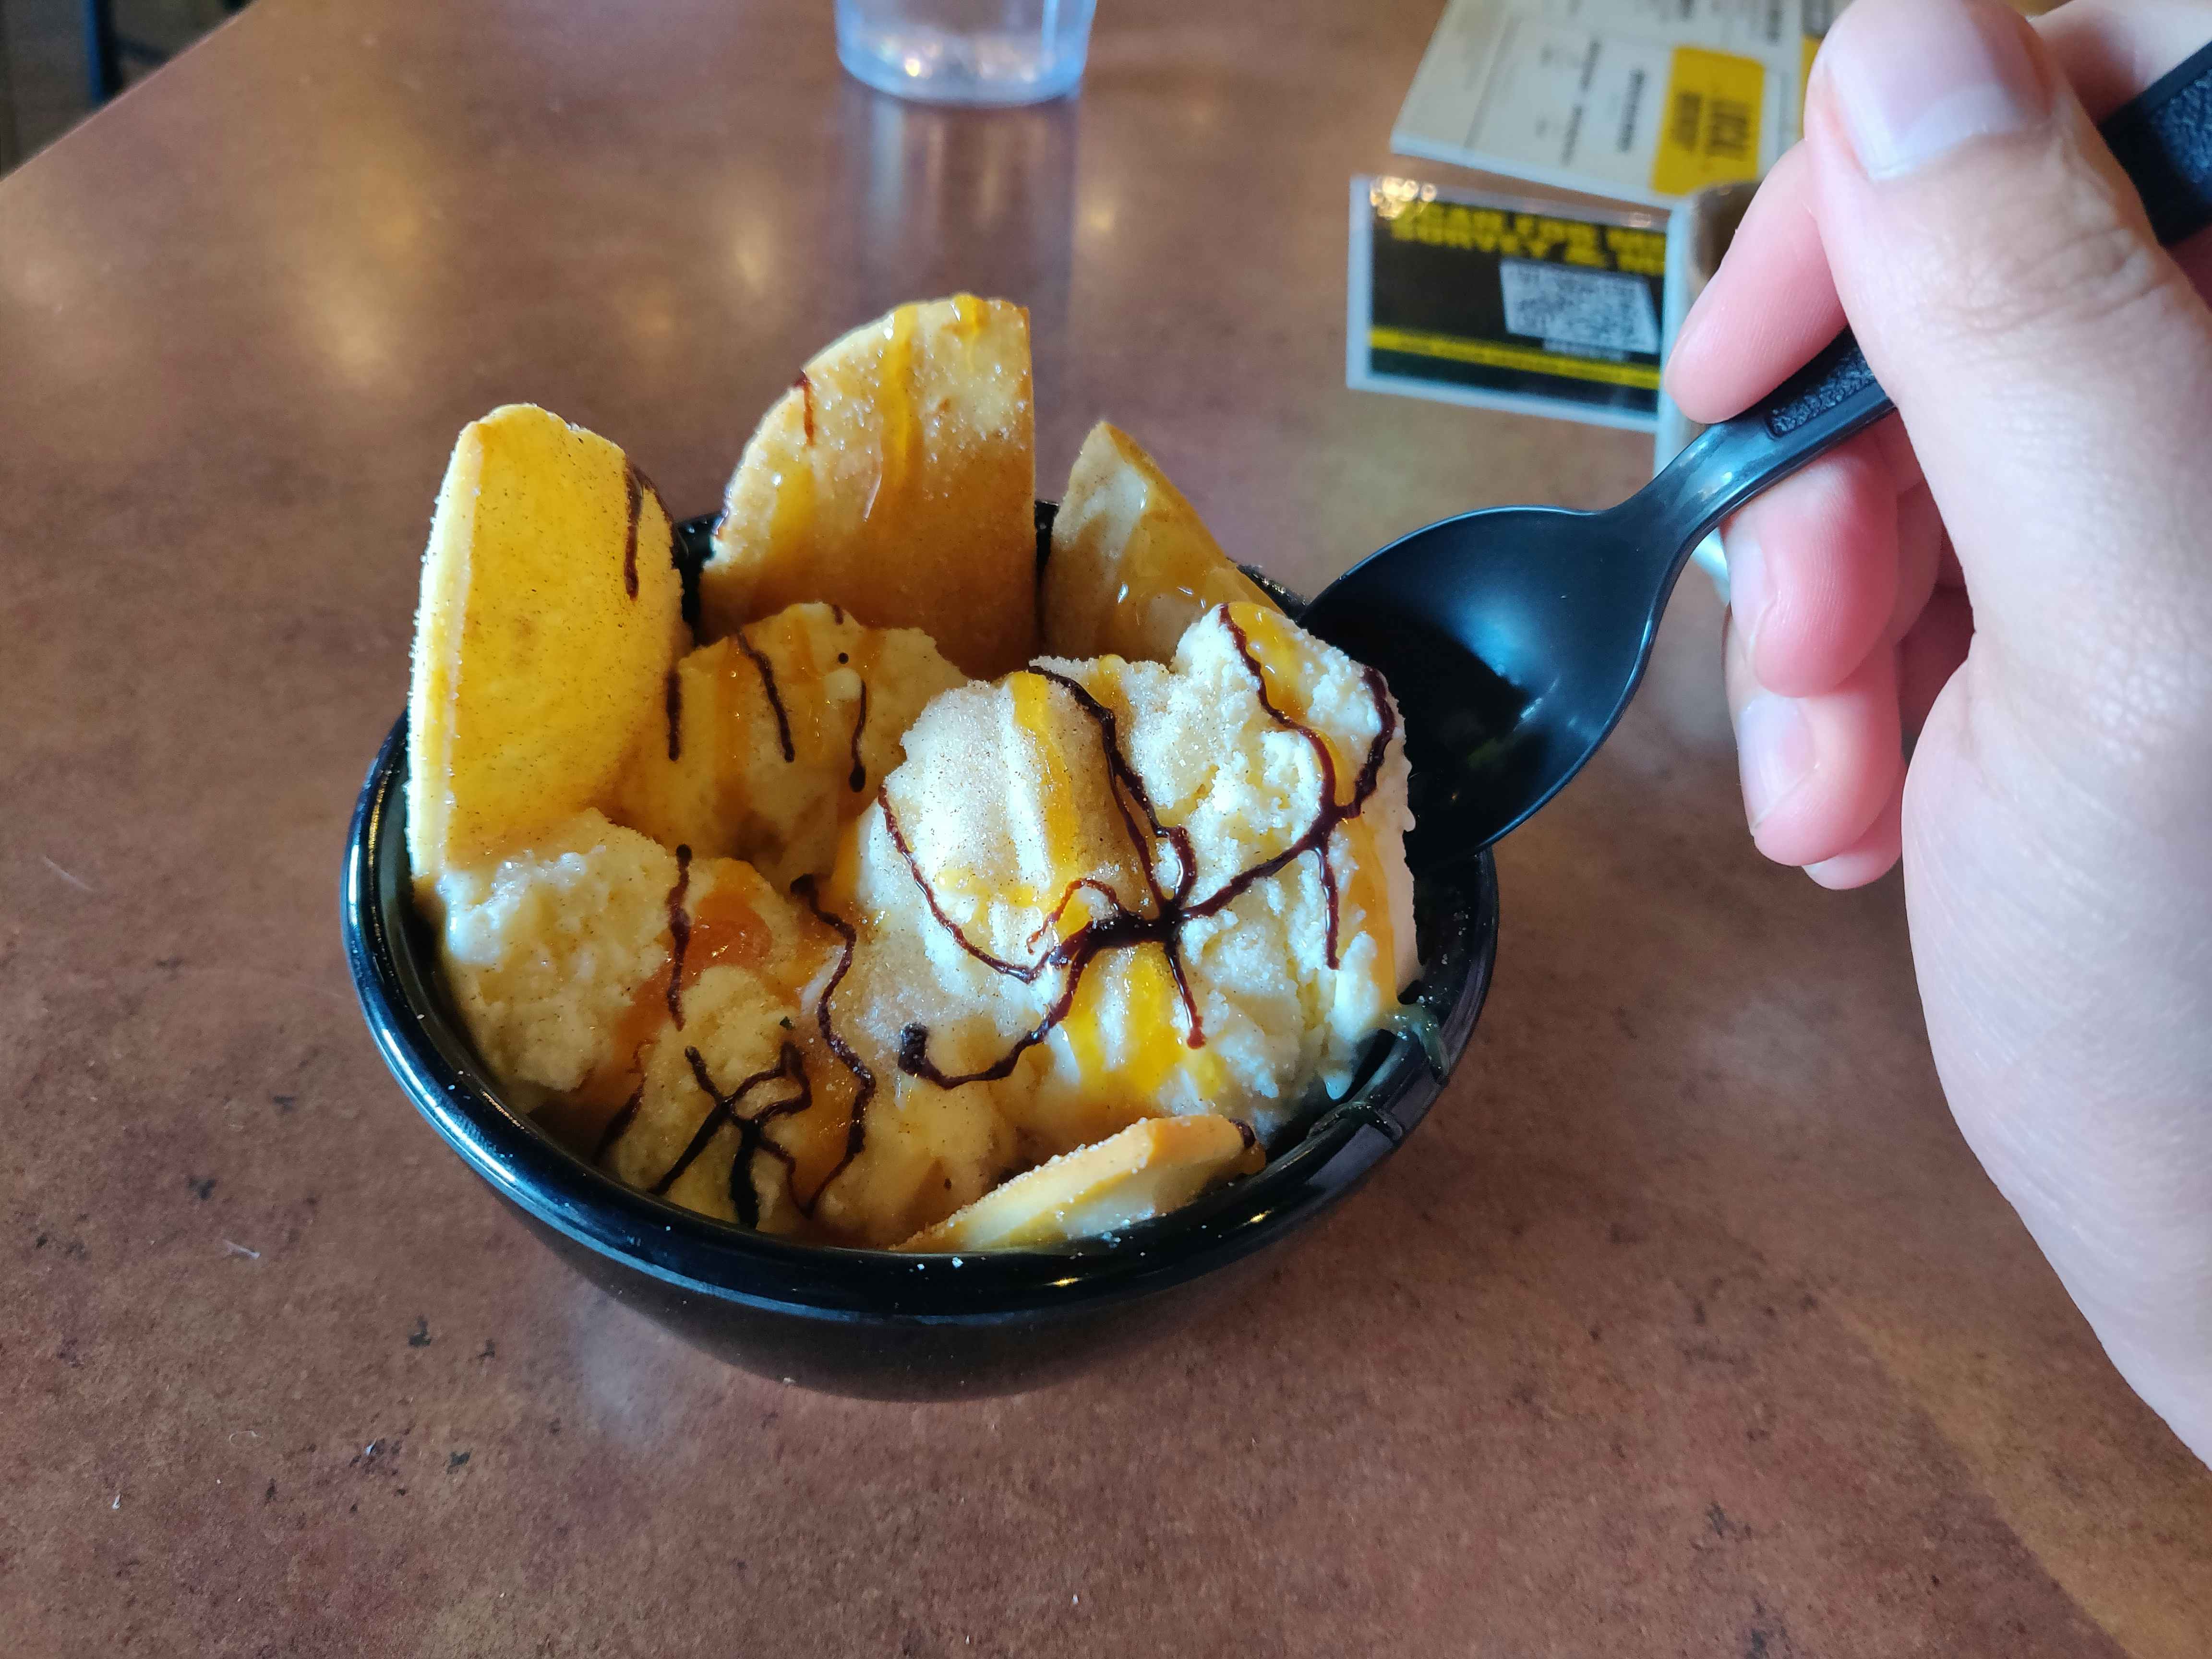 A person scooping their spoon into a bowl of Buffalo Wild Wings loaded ice cream sitting on the table.